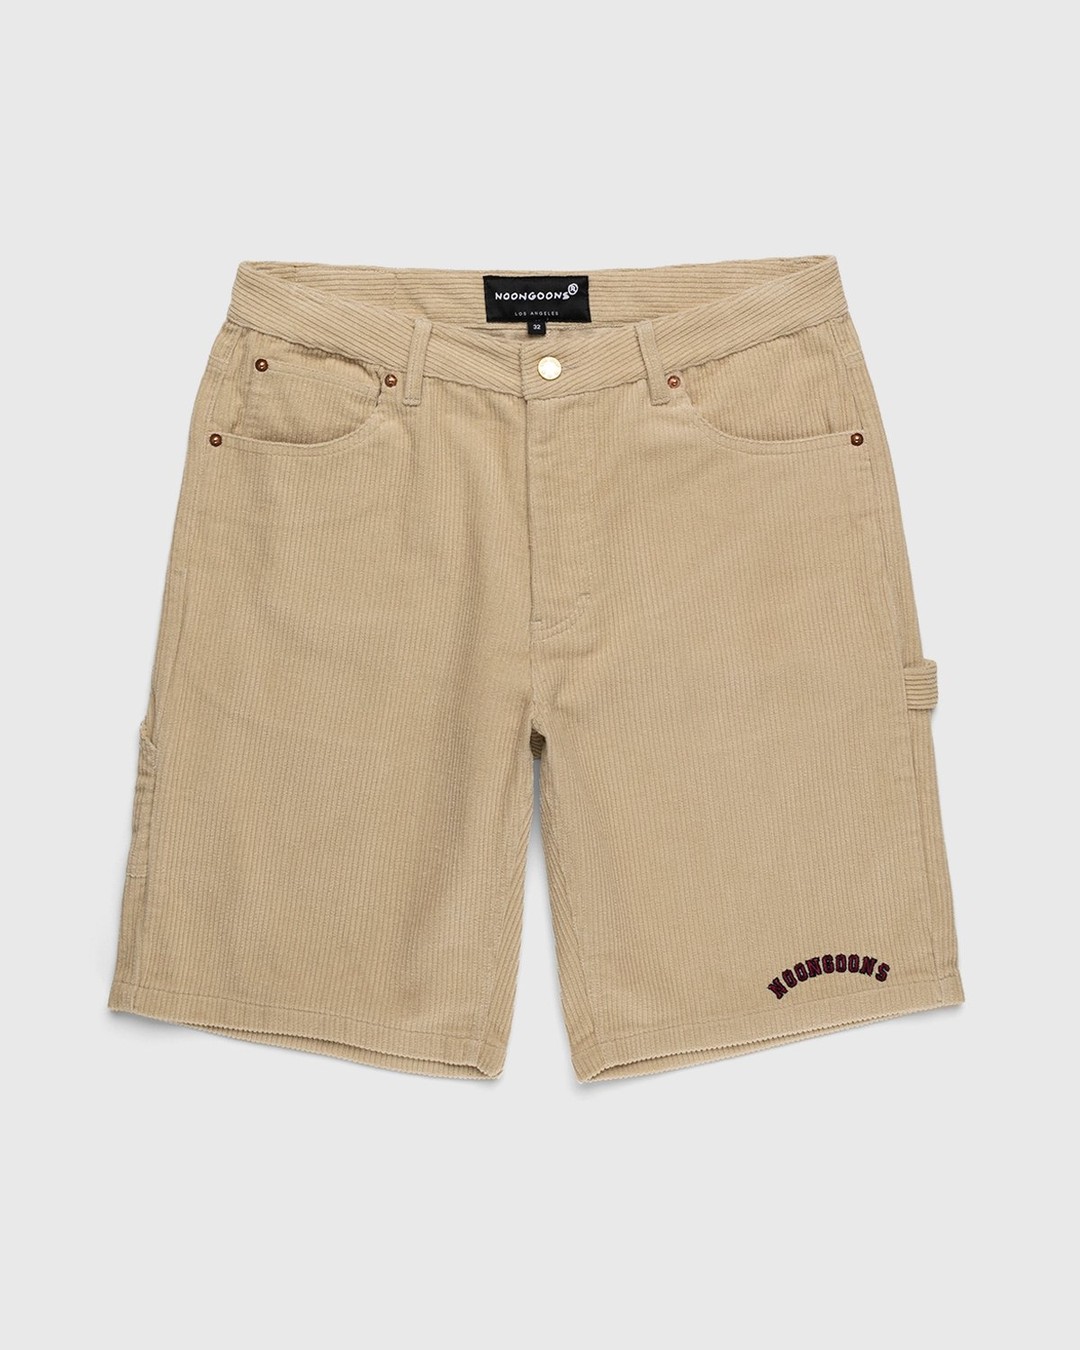 Noon Goons – Sublime Cord Short Overcast - Bermuda Cuts - Beige - Image 1